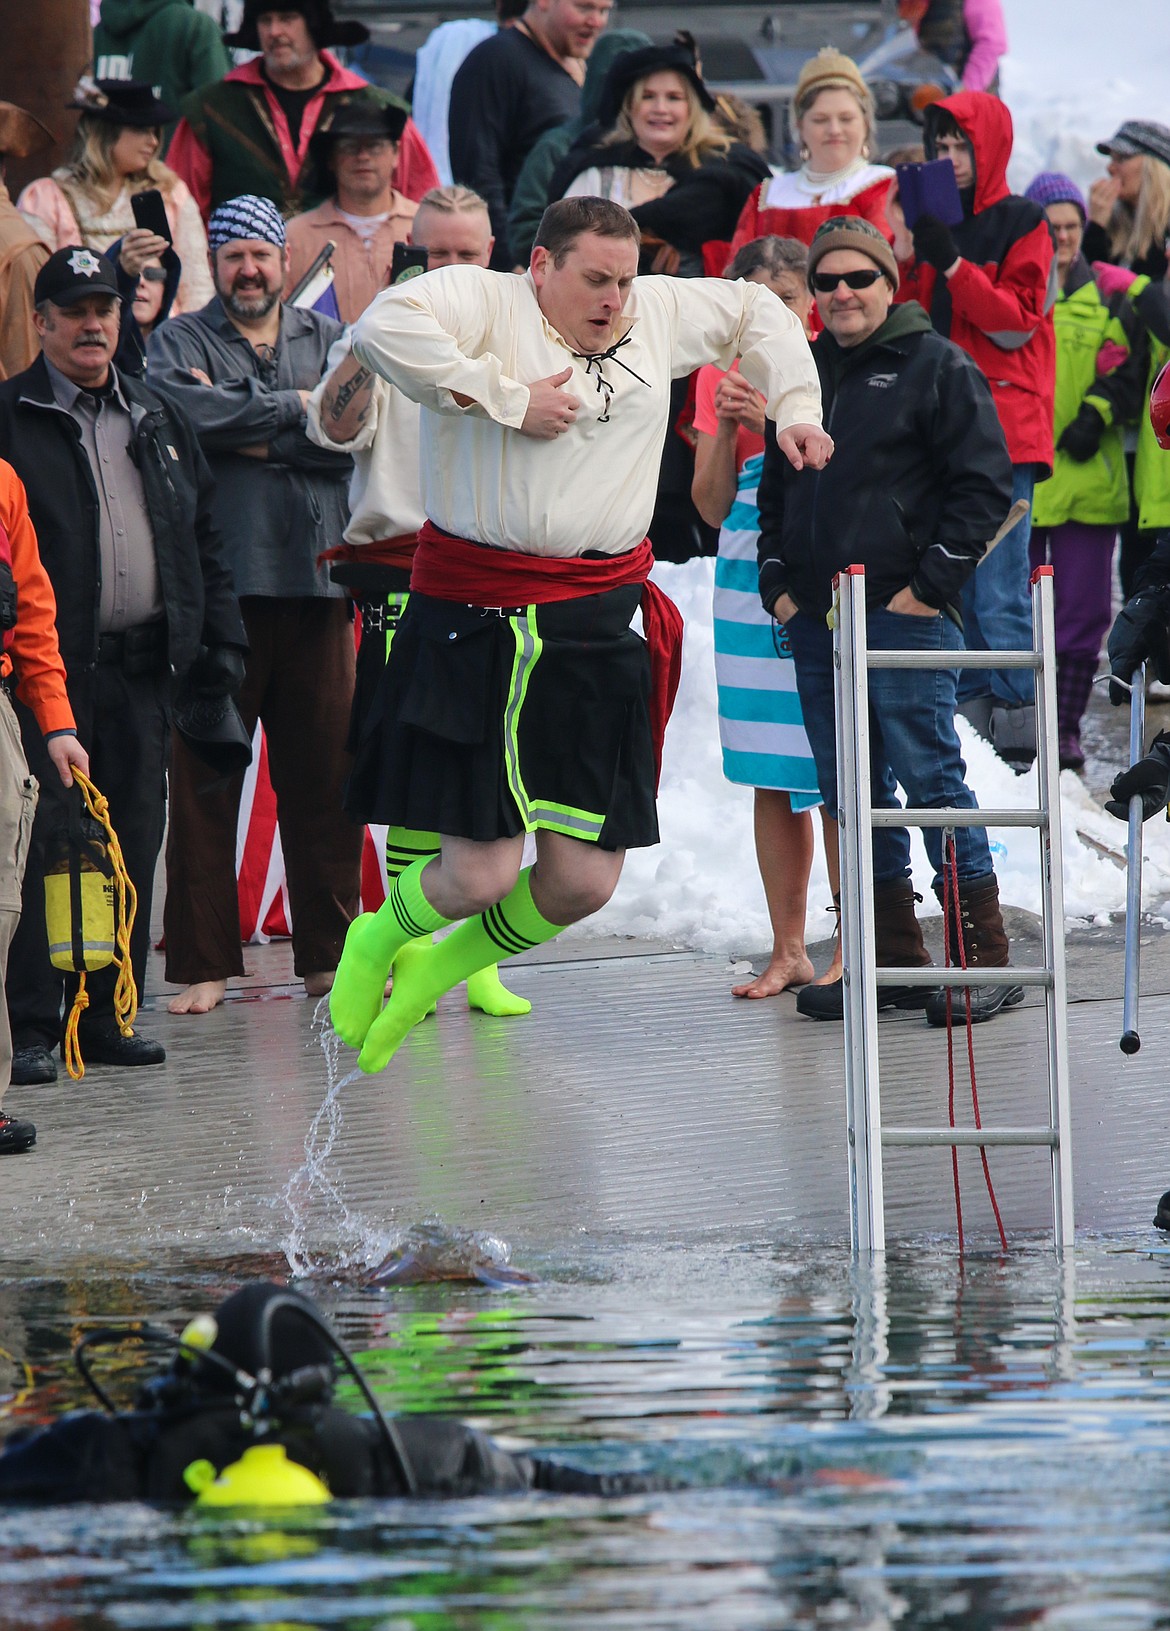 Photo by MANDI BATEMAN
North Bench Fire Chief Gus Jackson takes a mighty leap off the dock.